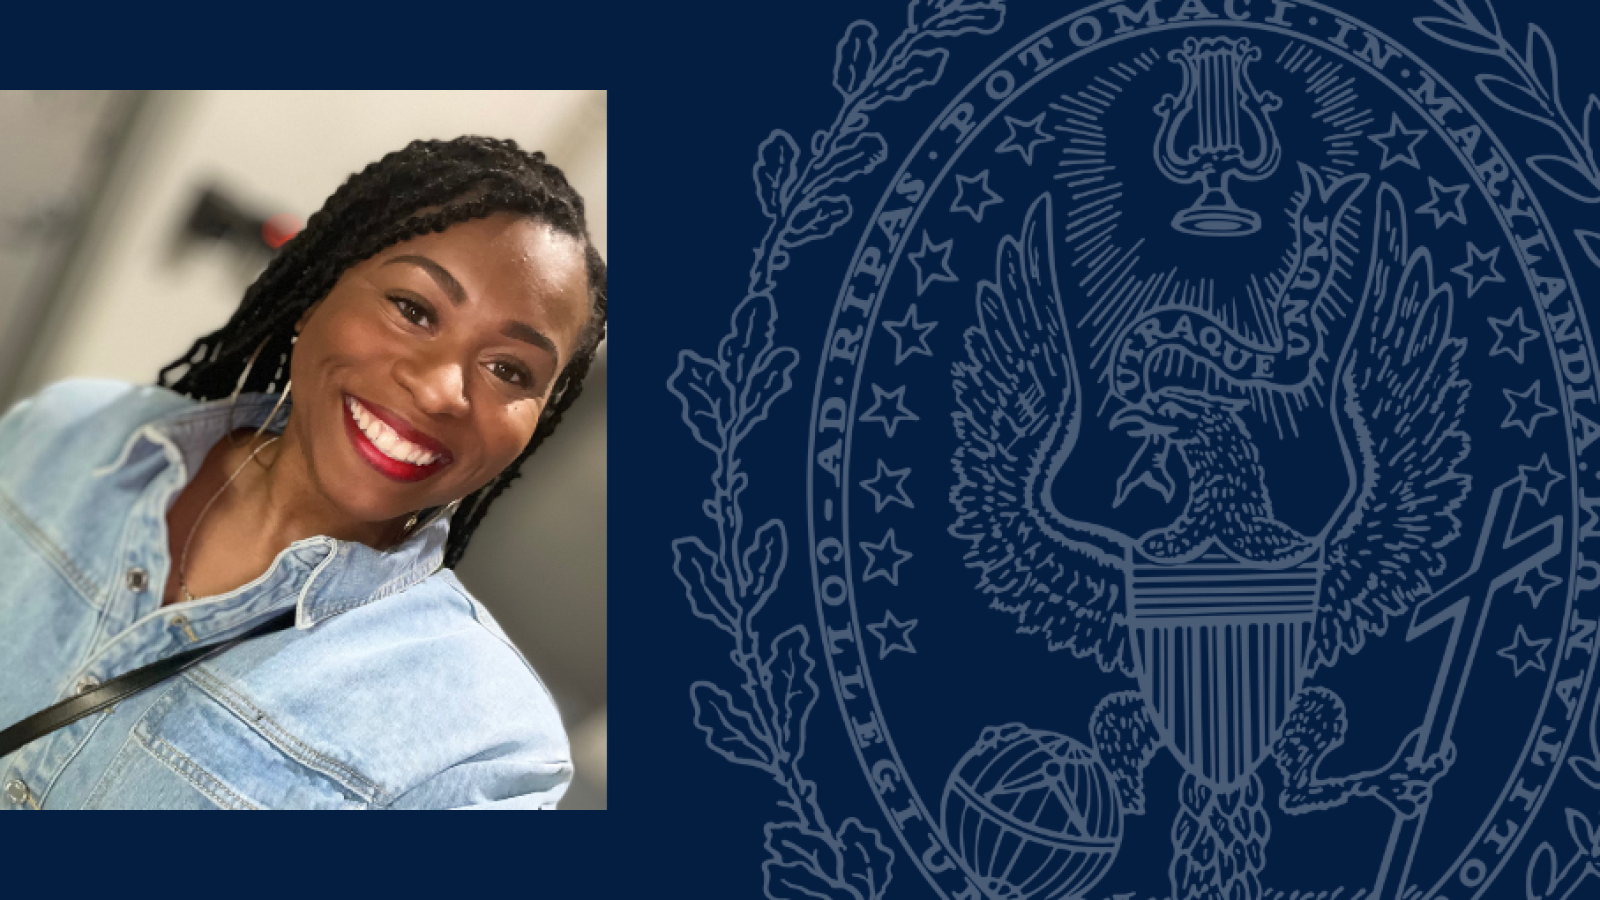 Rachel Dennis headshot overlaid on graphic with blue background and Georgetown University seal